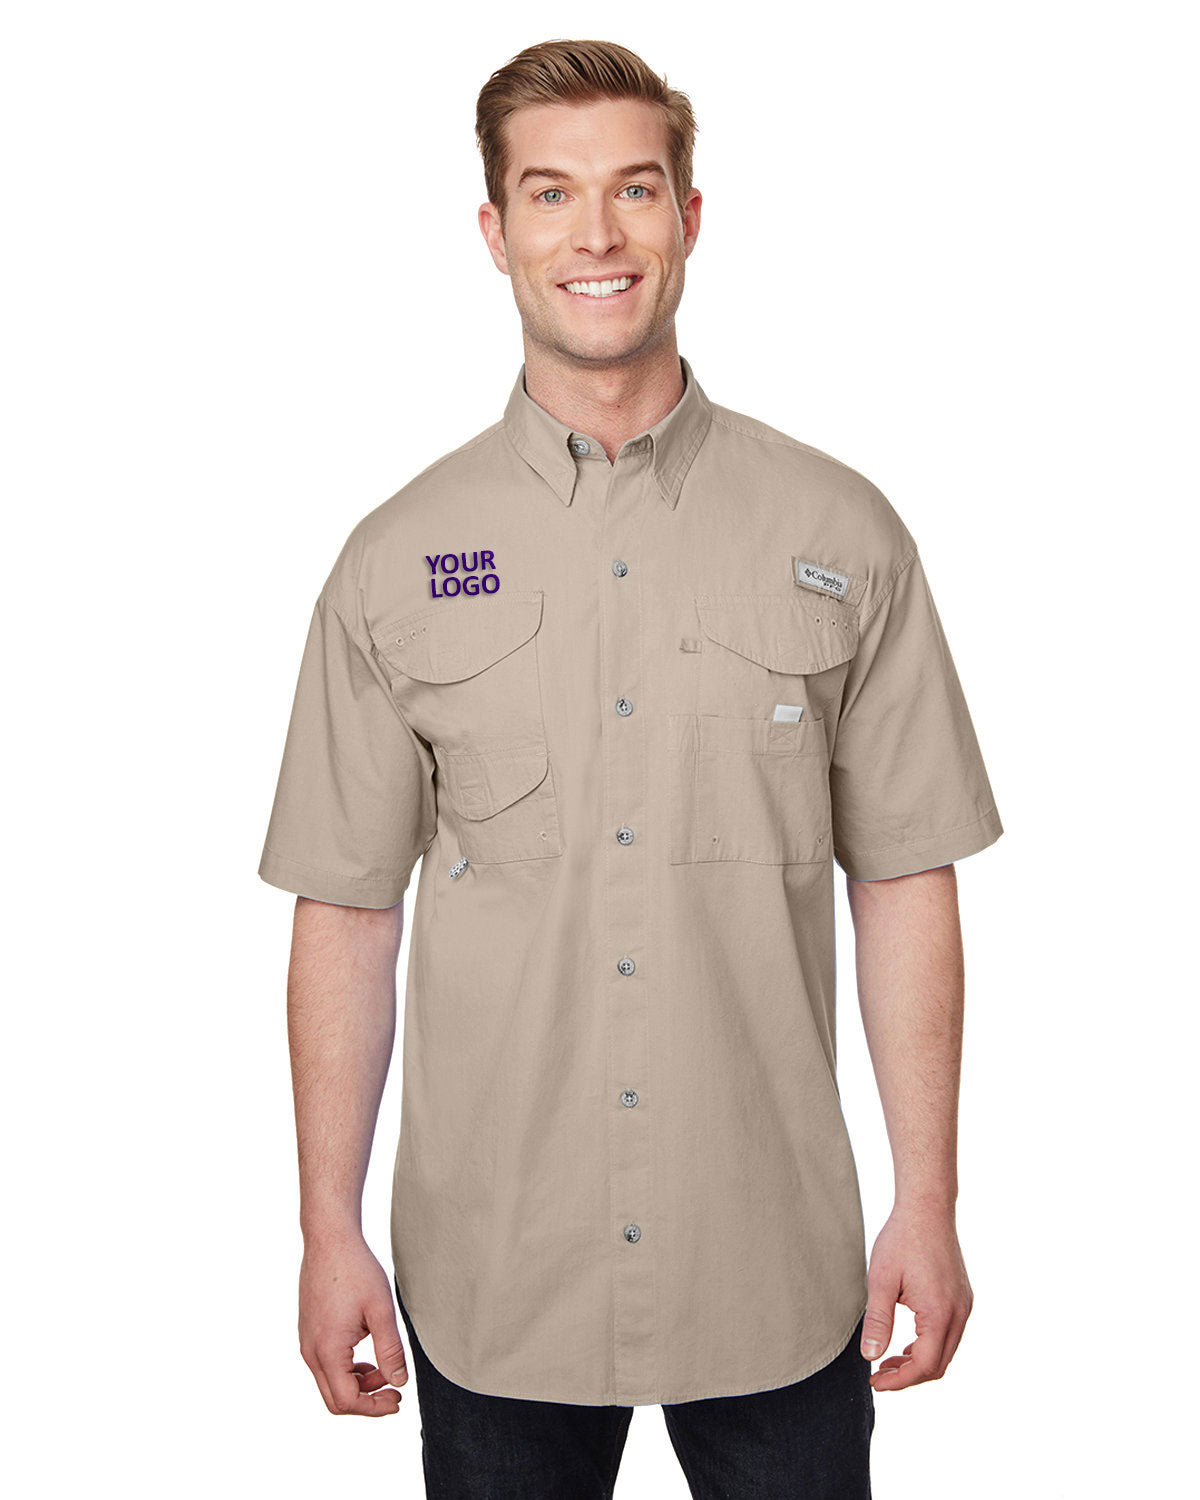 Columbia Fossil 7130 custom embroidered shirts